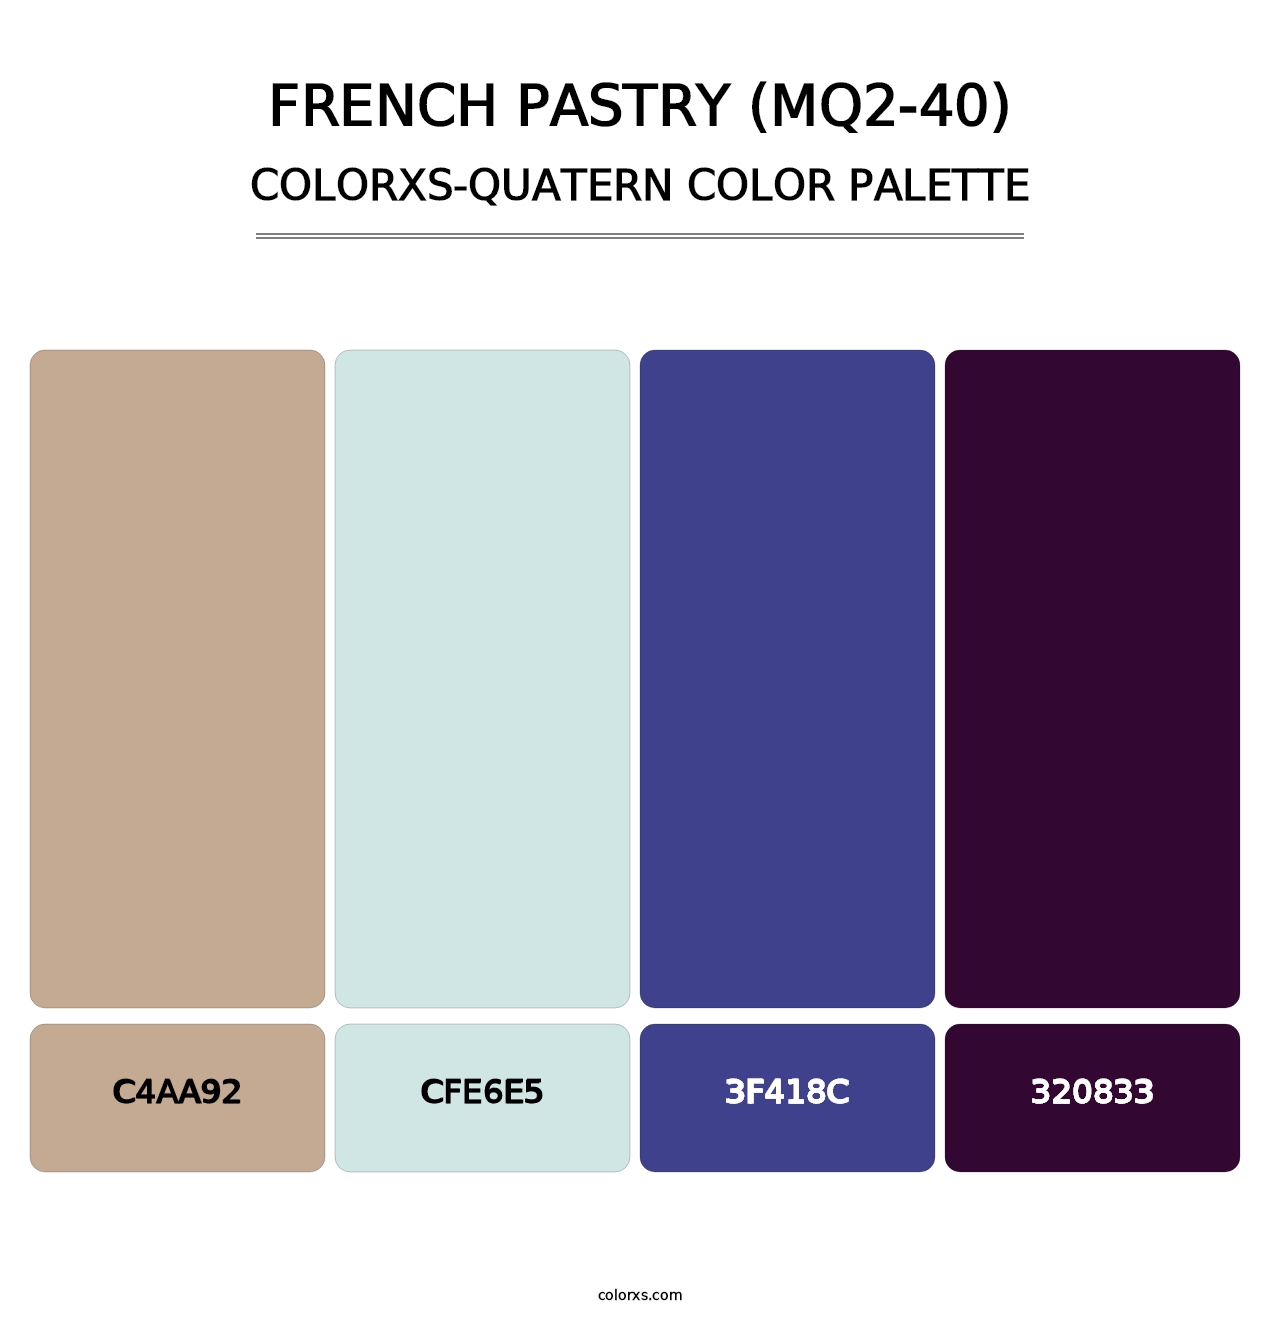 French Pastry (MQ2-40) - Colorxs Quatern Palette